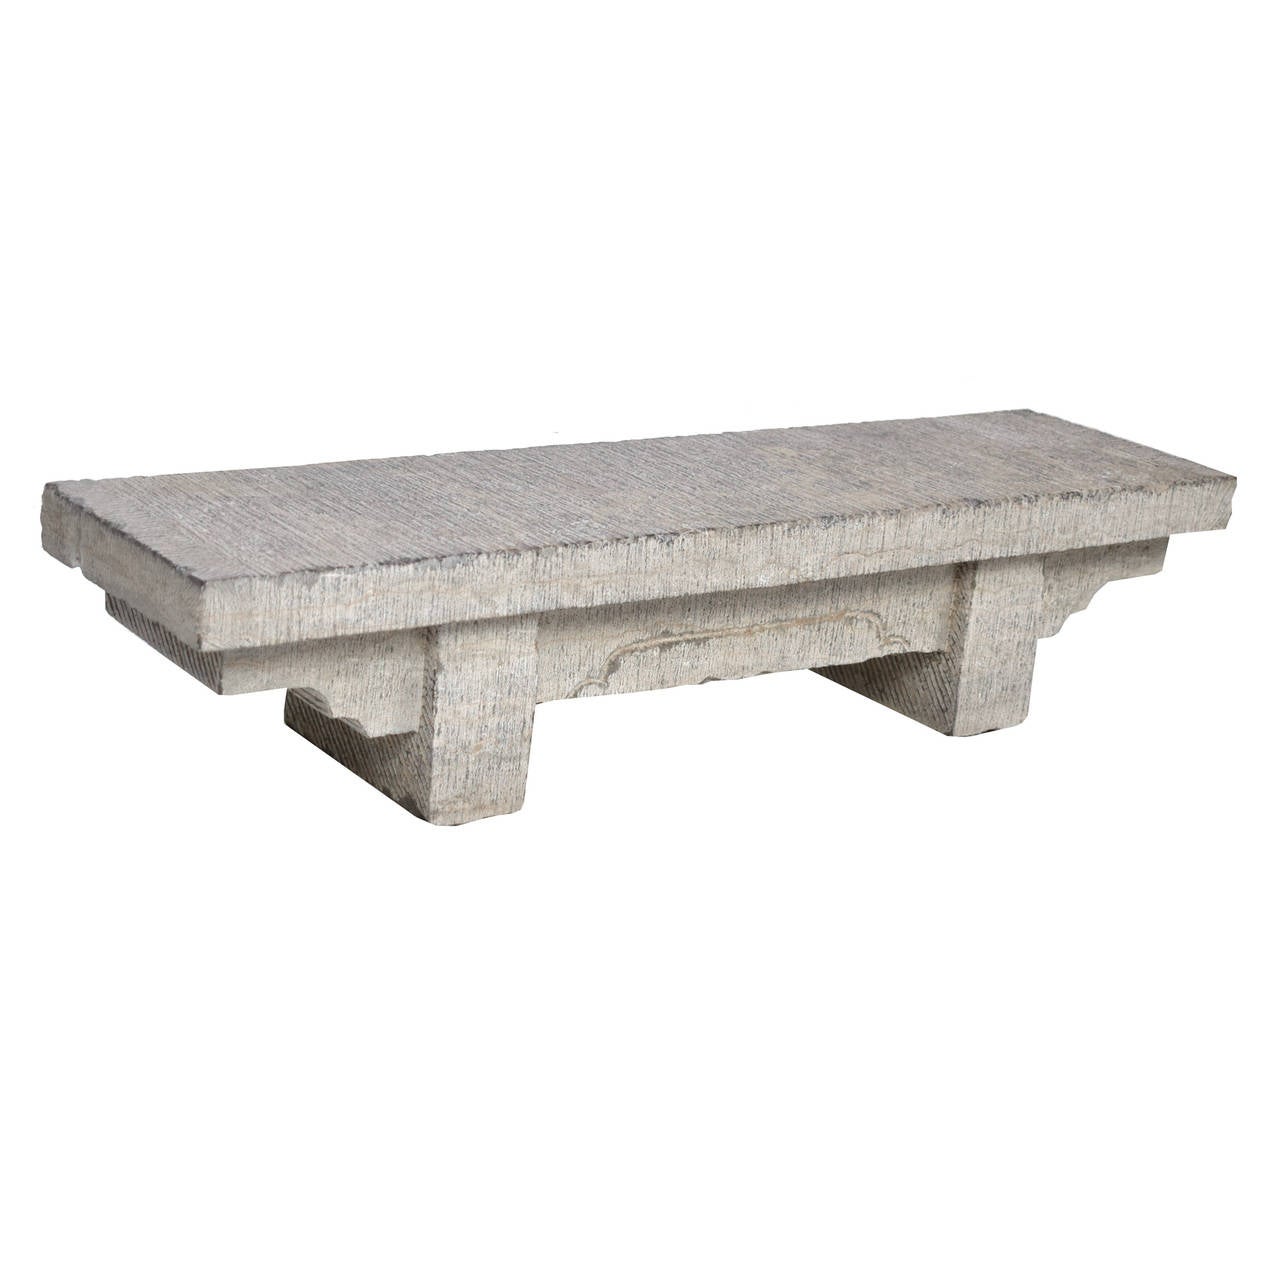 A small-scale limestone Doon collection bench from Shanxi province, China with a carved apron.

